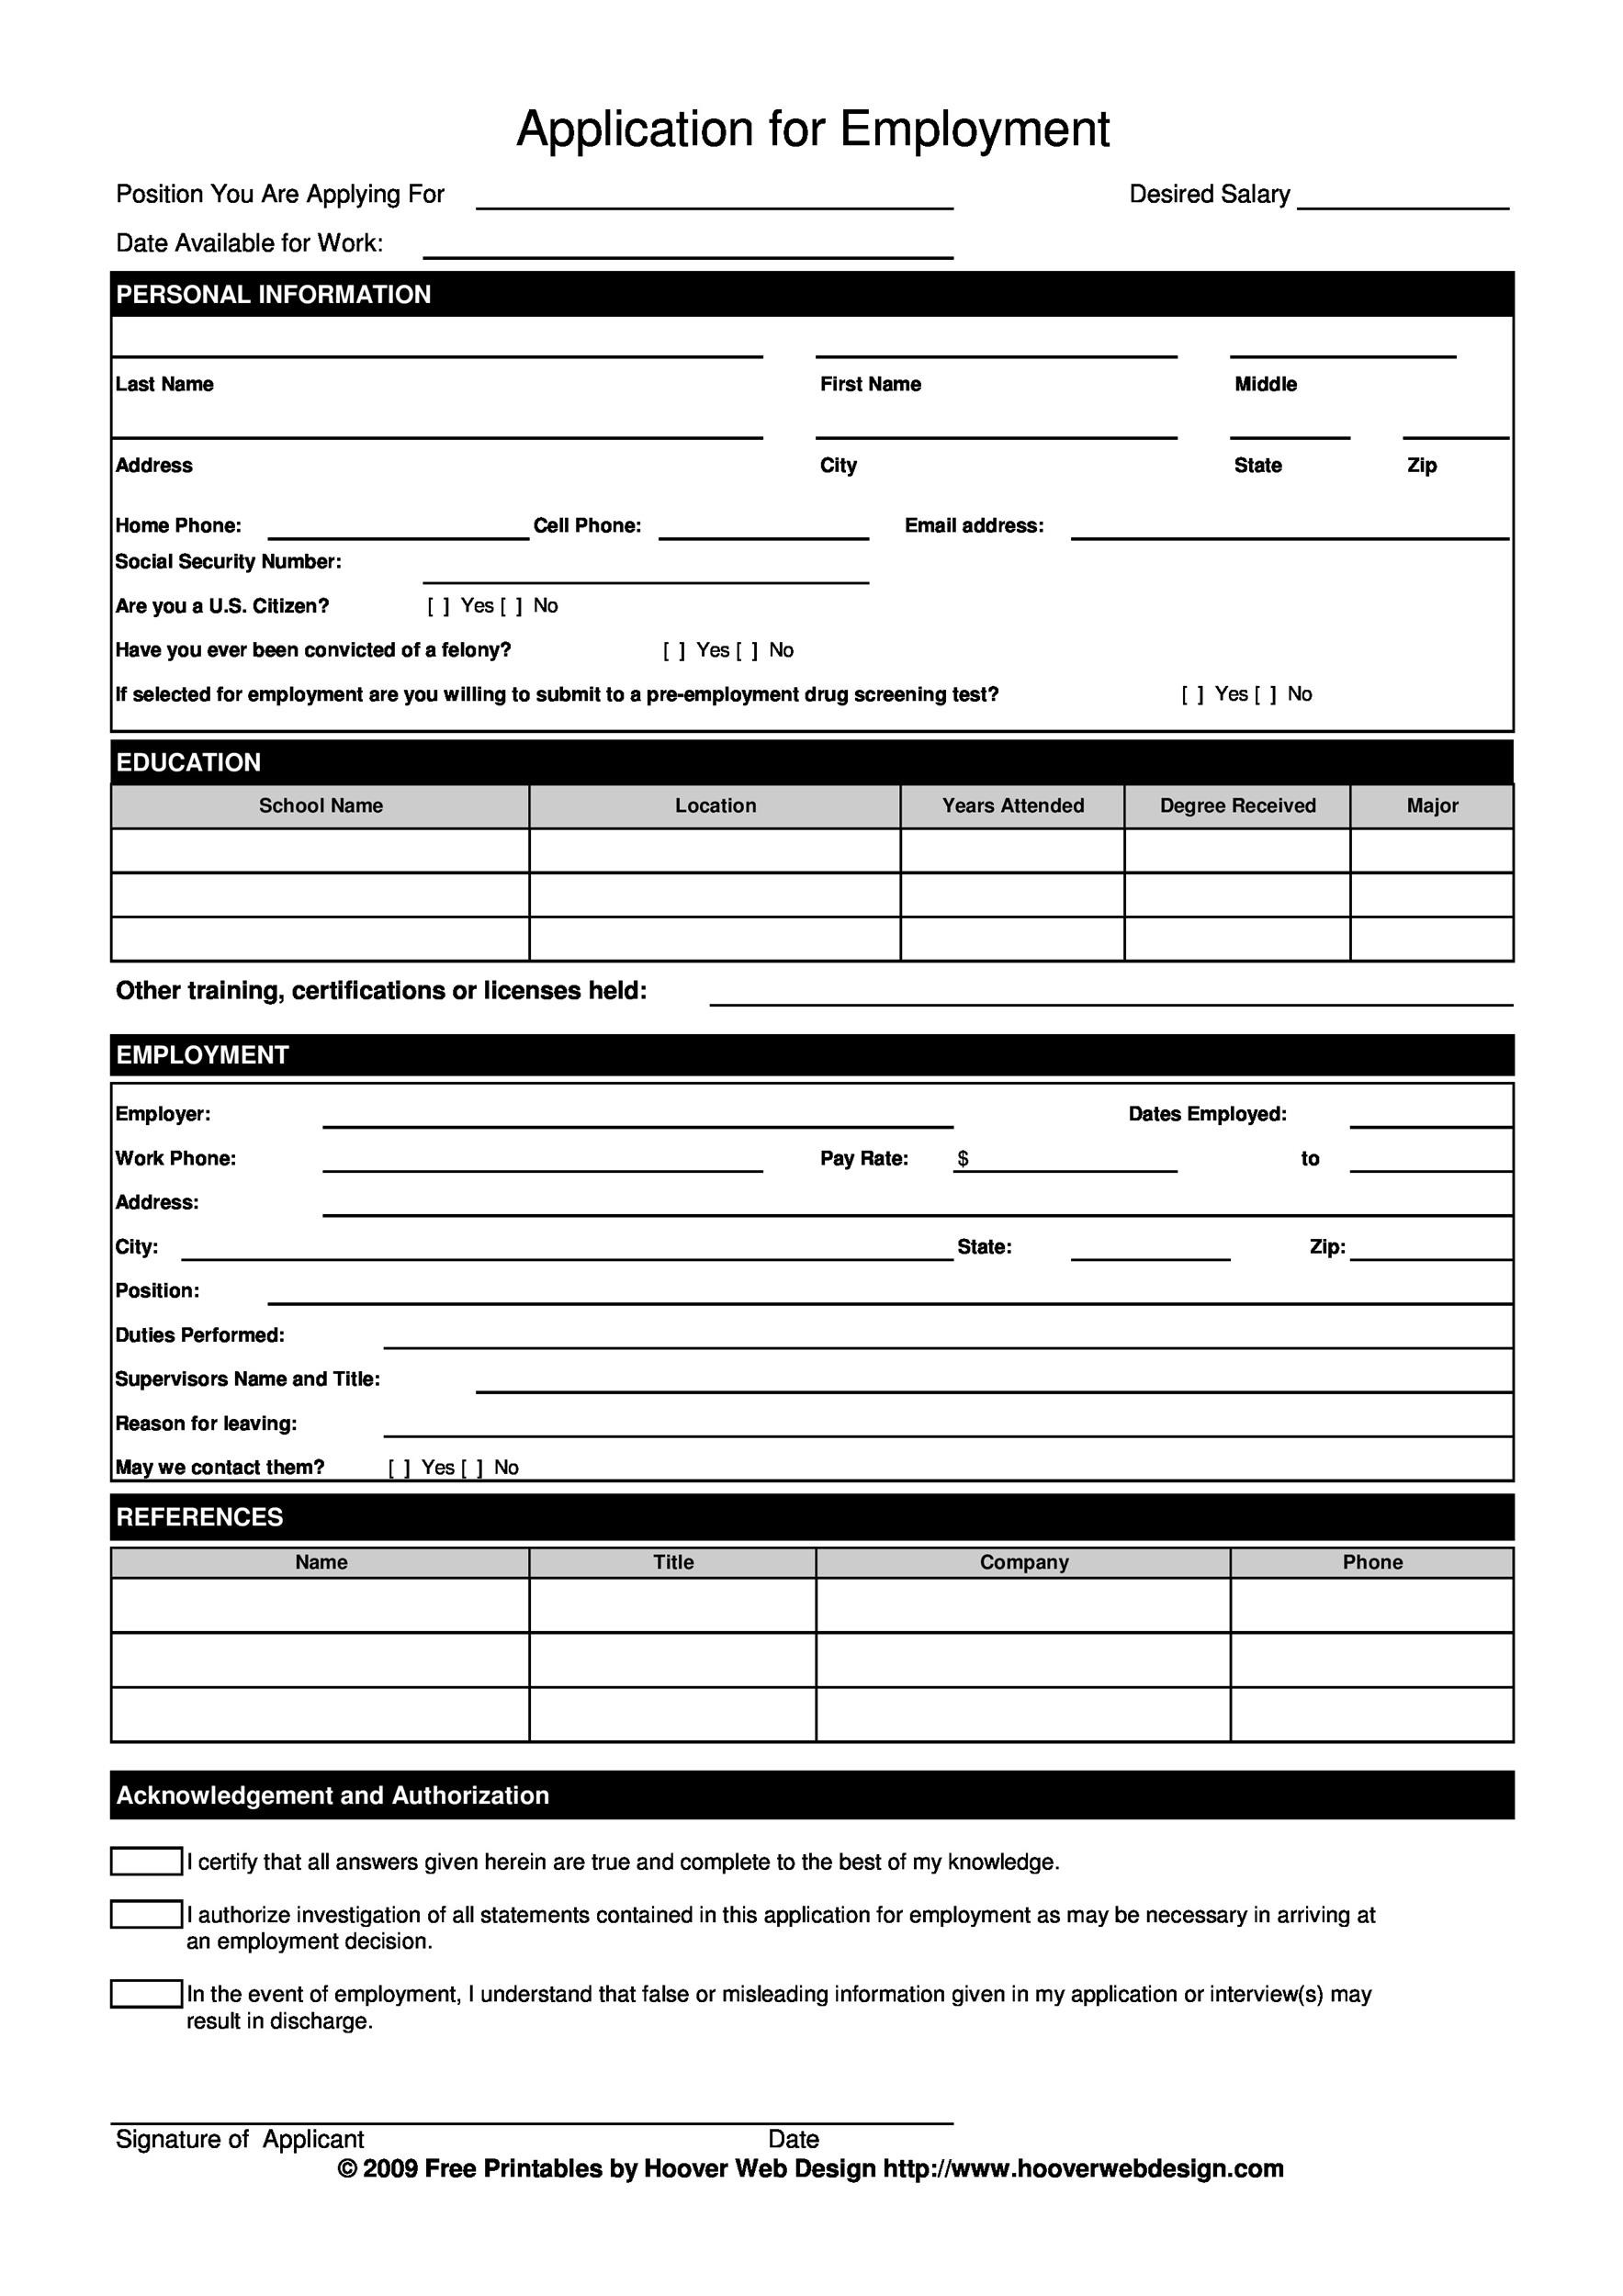 printable-form-templates-application-printable-forms-free-online